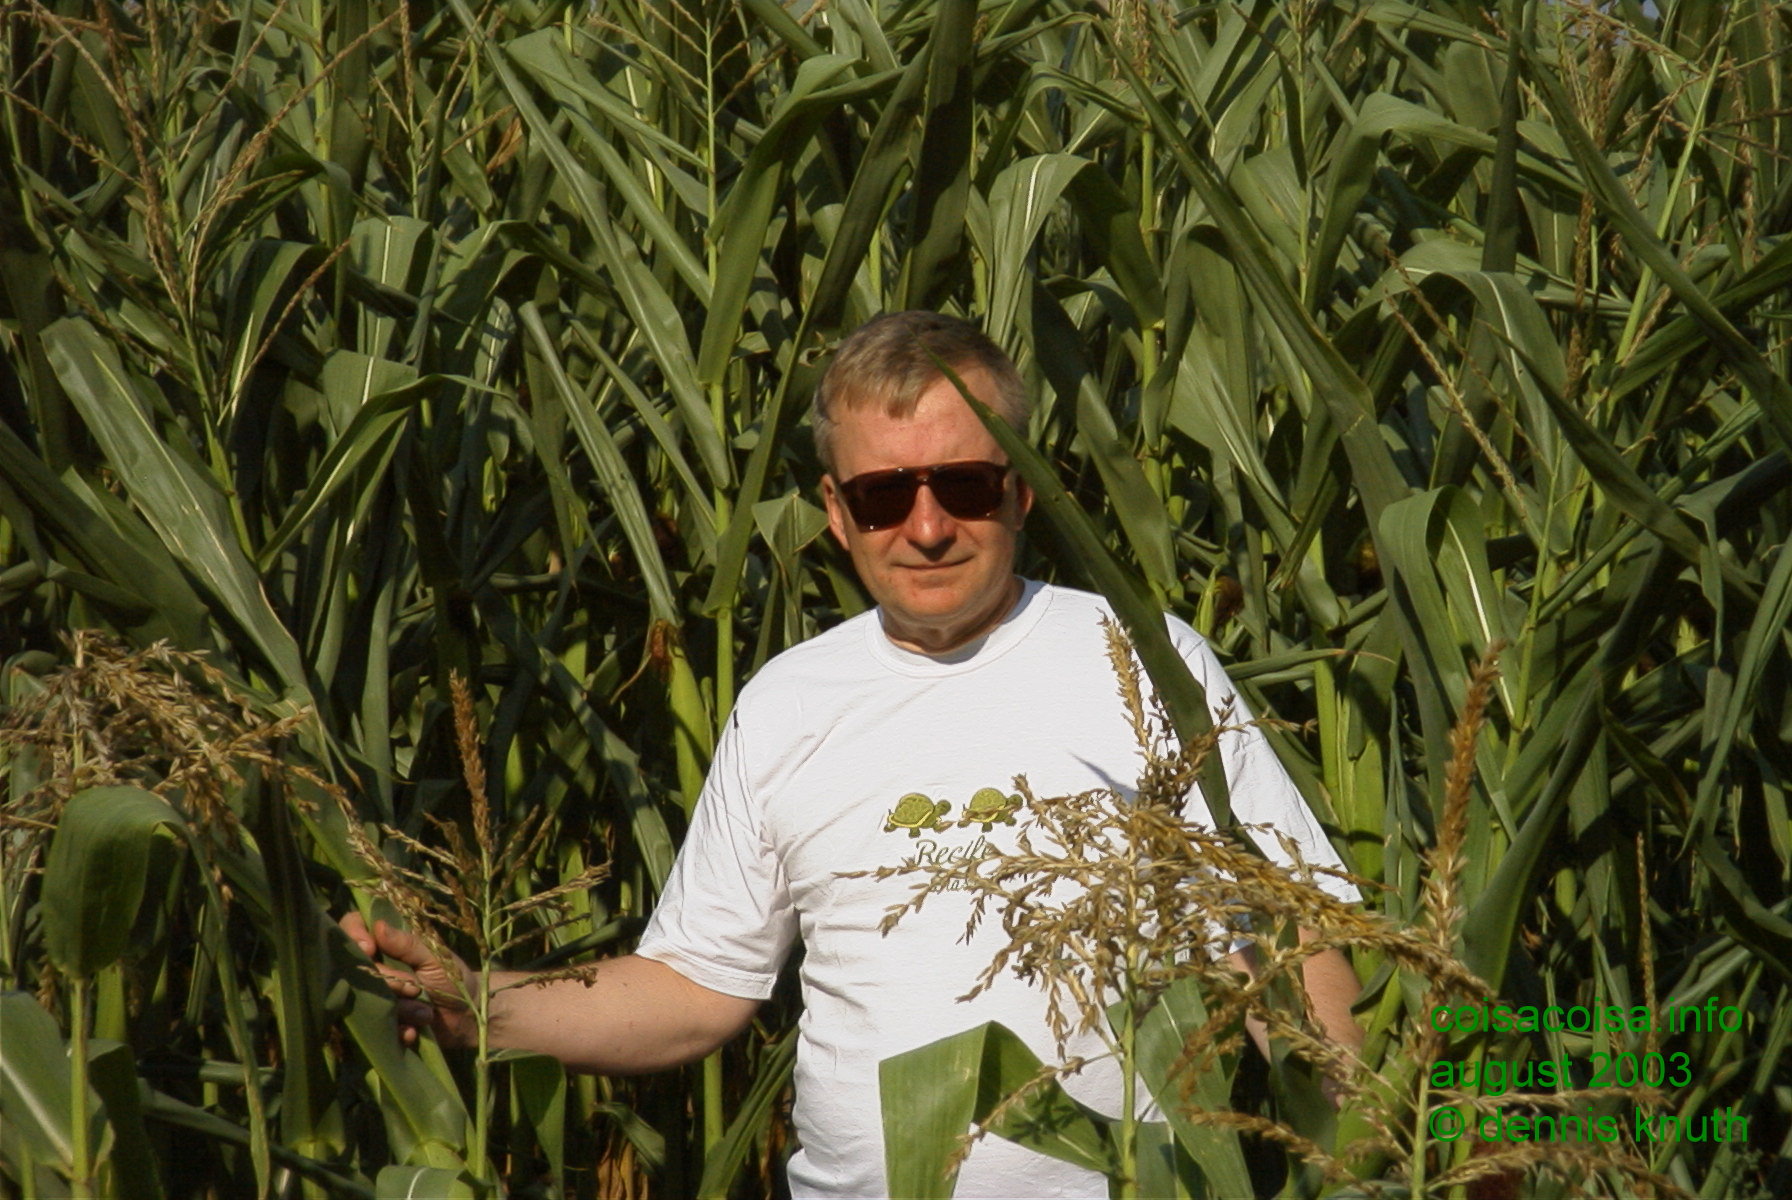 Dennis Knuth in the cornfield